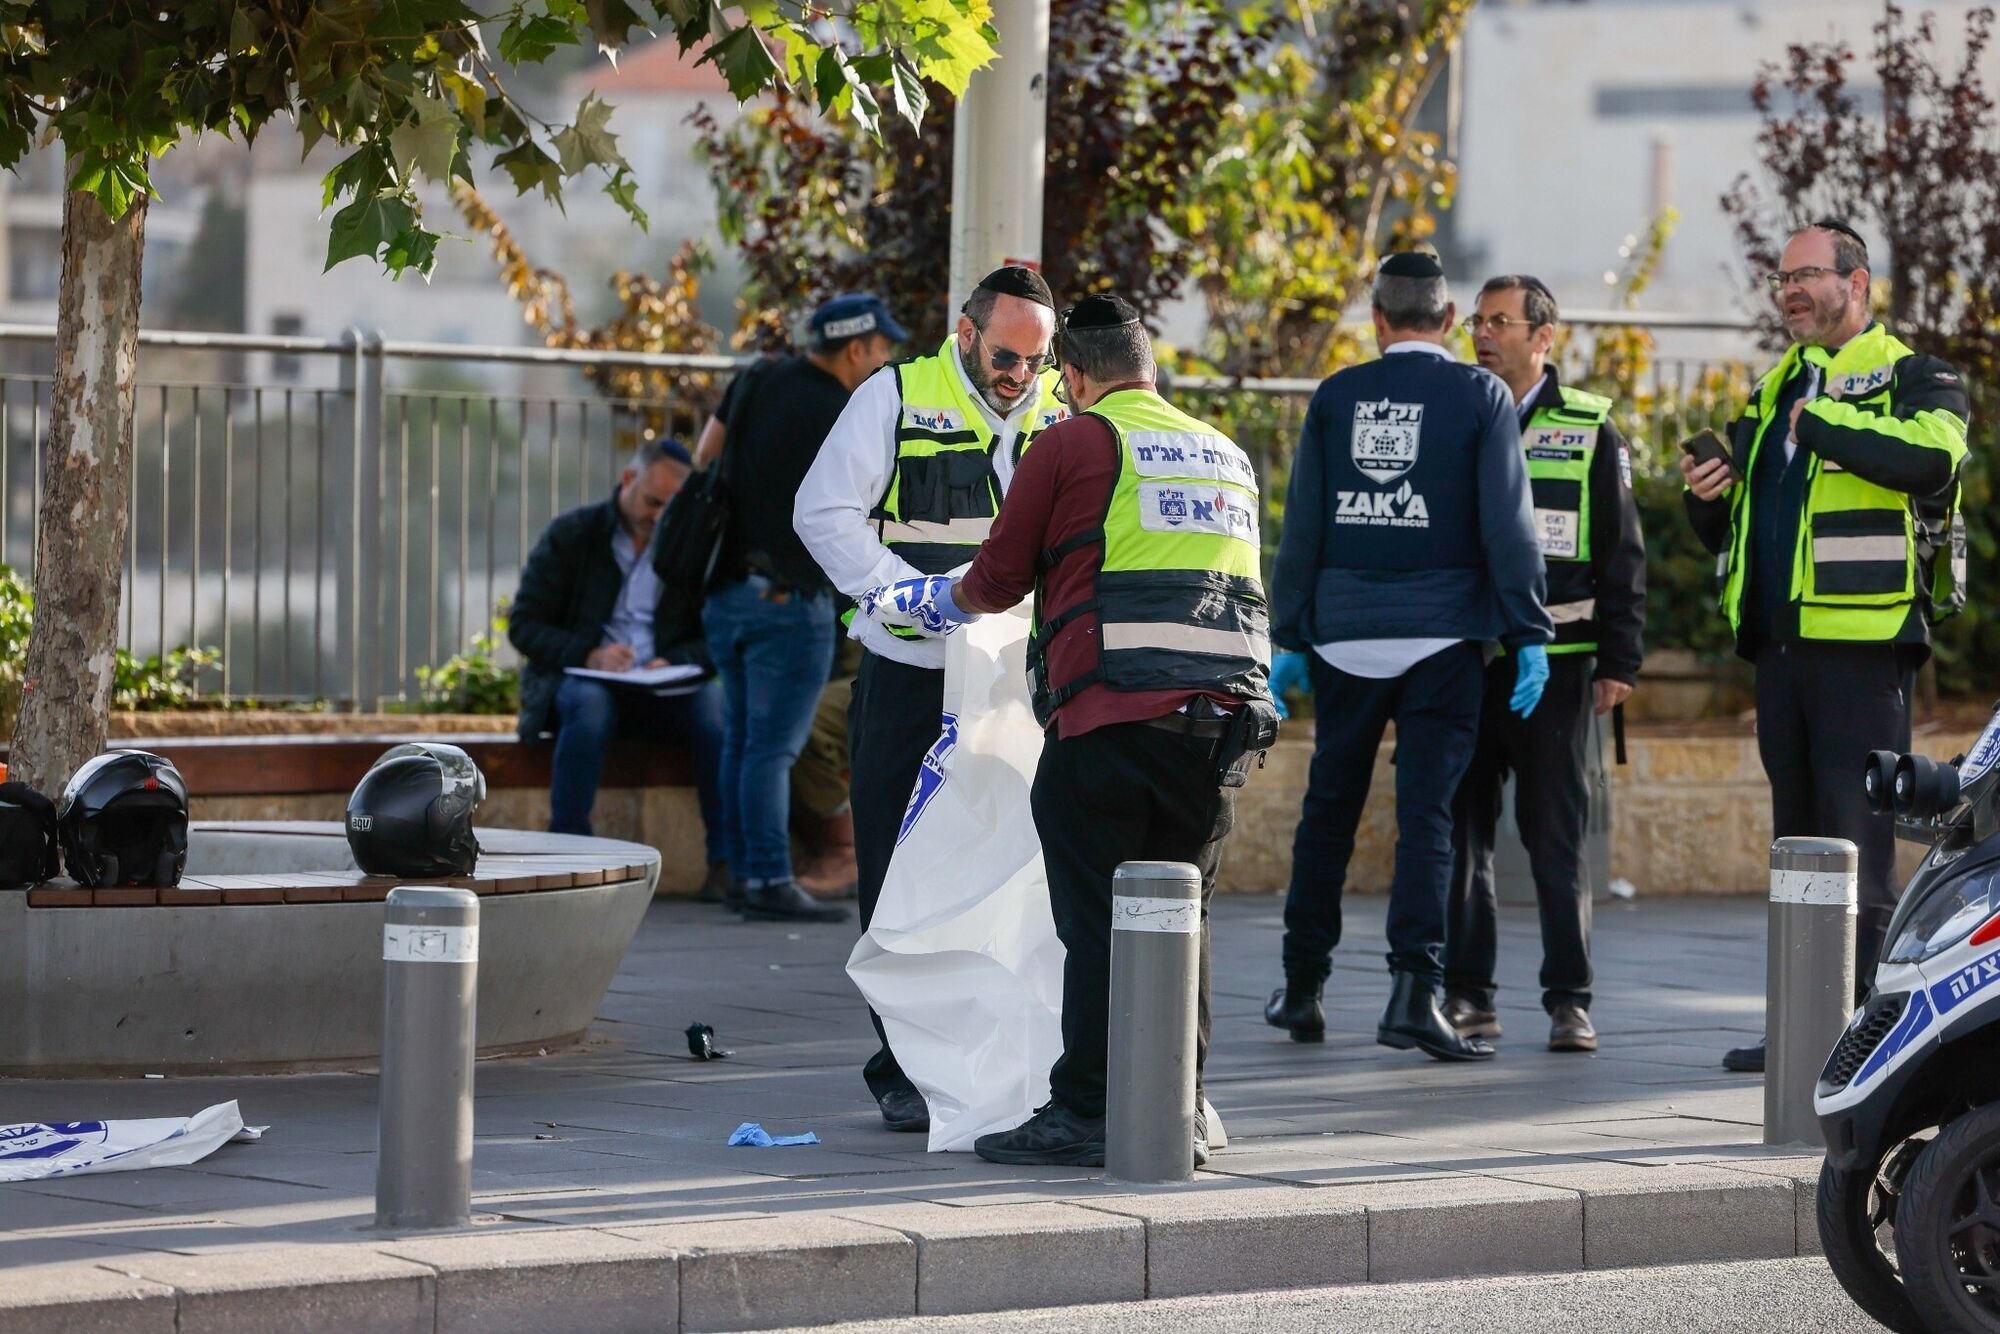 Unknown gunmen open fire in Jerusalem: two dead, 8 wounded, 5 in critical condition